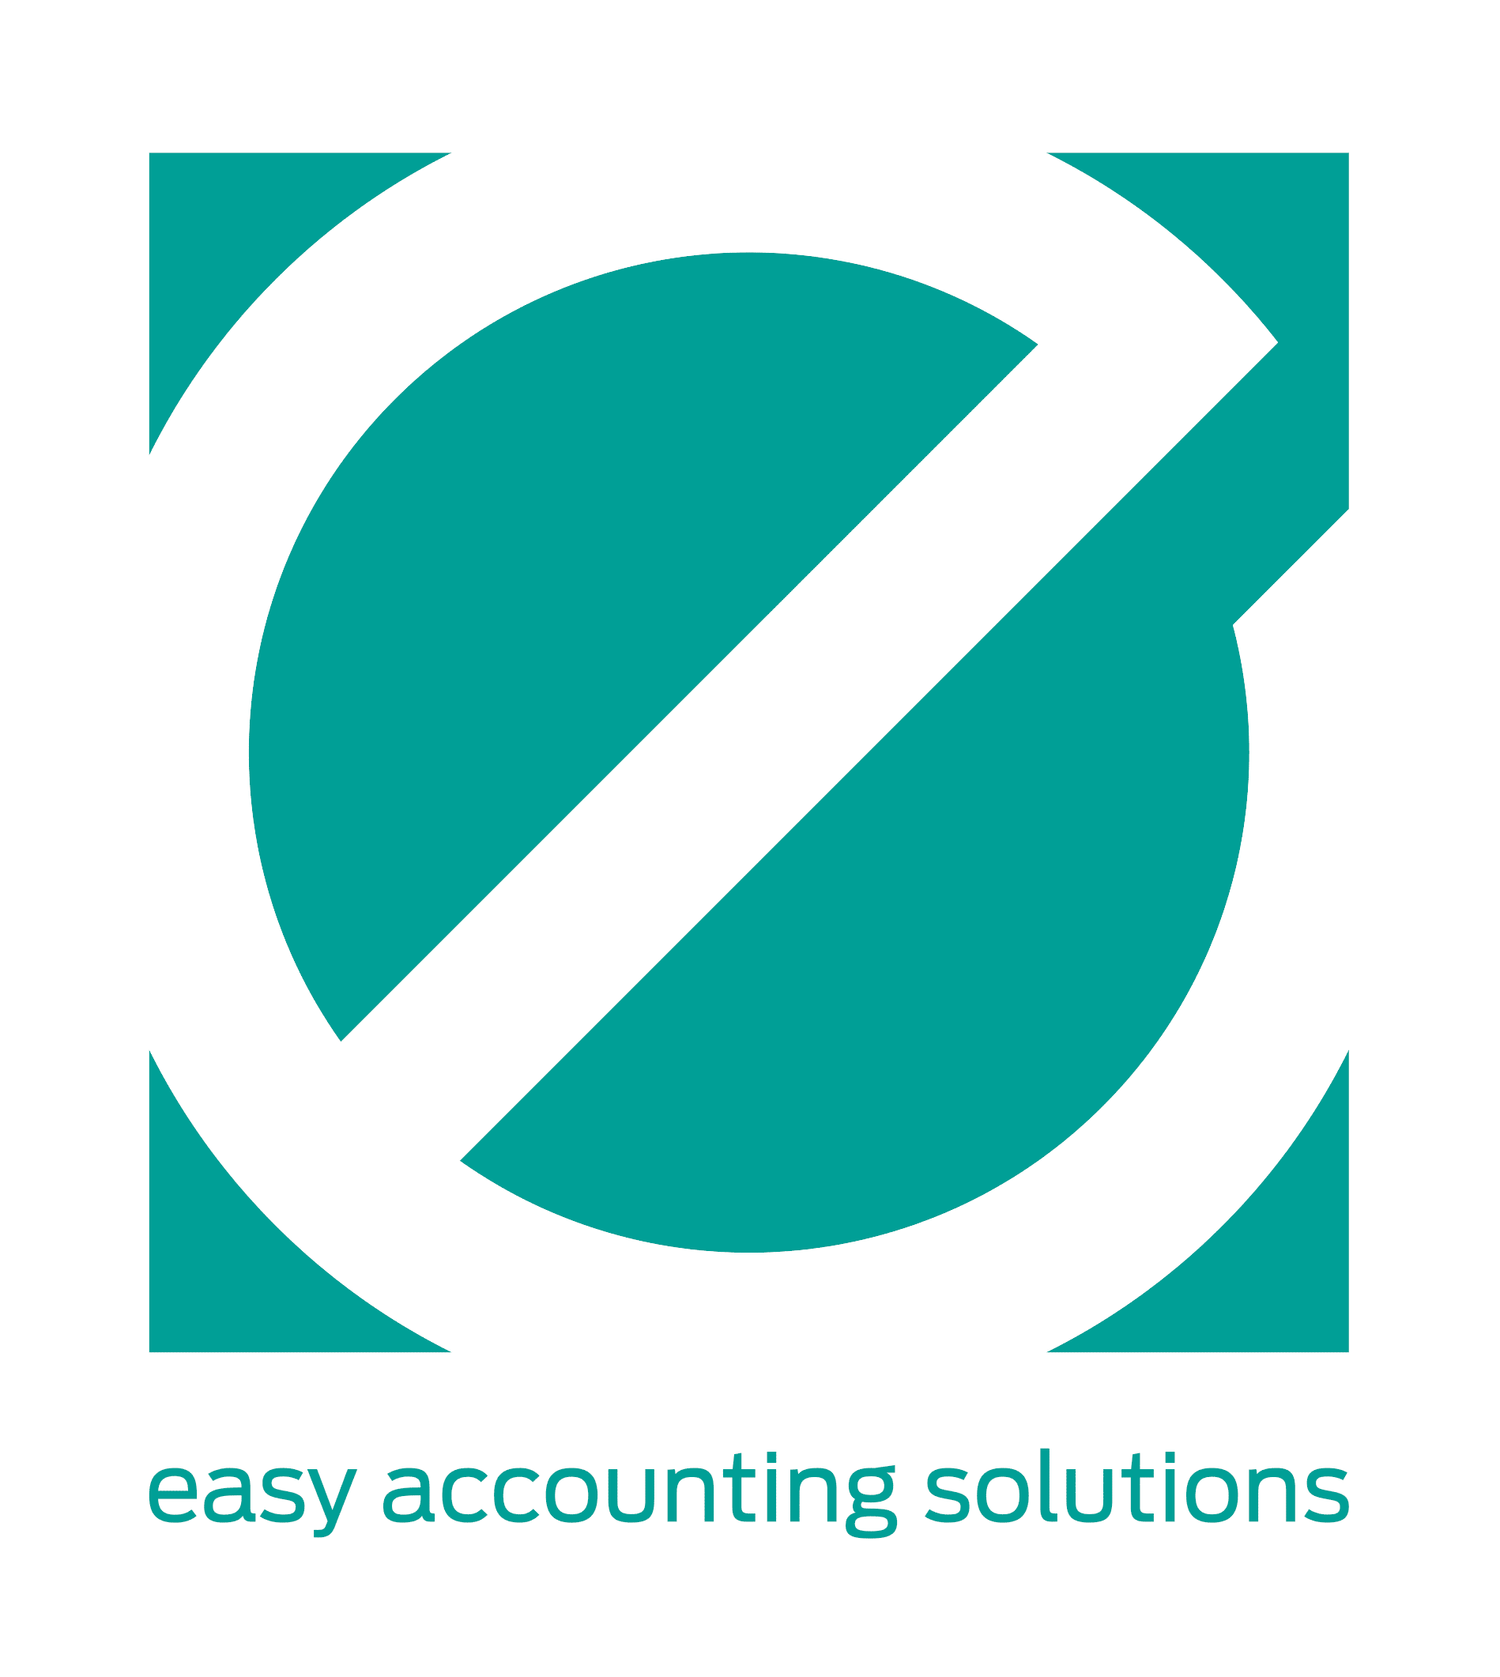 Easy Accounting Solutions - Accounting and Bookkeeping for Small Businesses